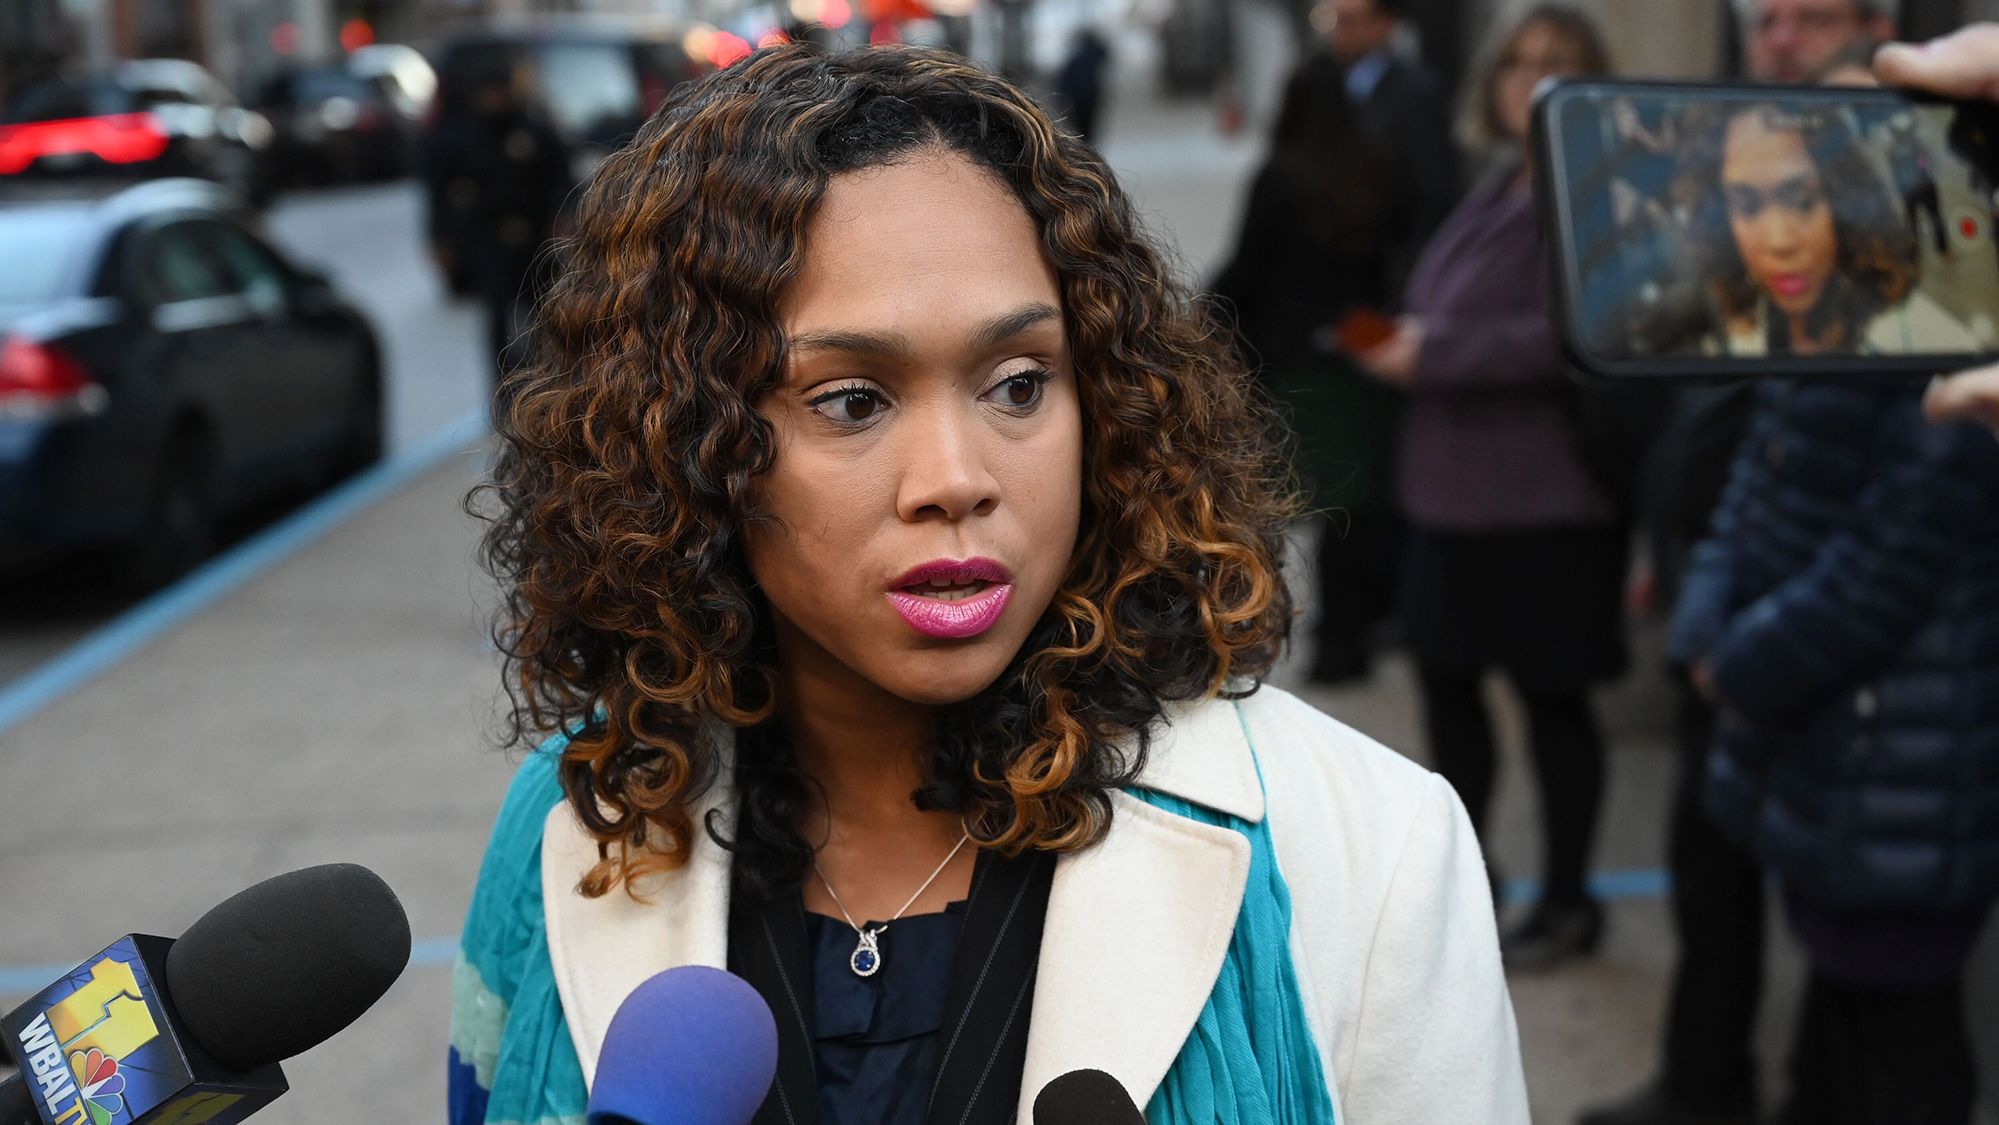 Baltimore City State's Attorney Marilyn Mosby speaks to the media on January 21, 2021.